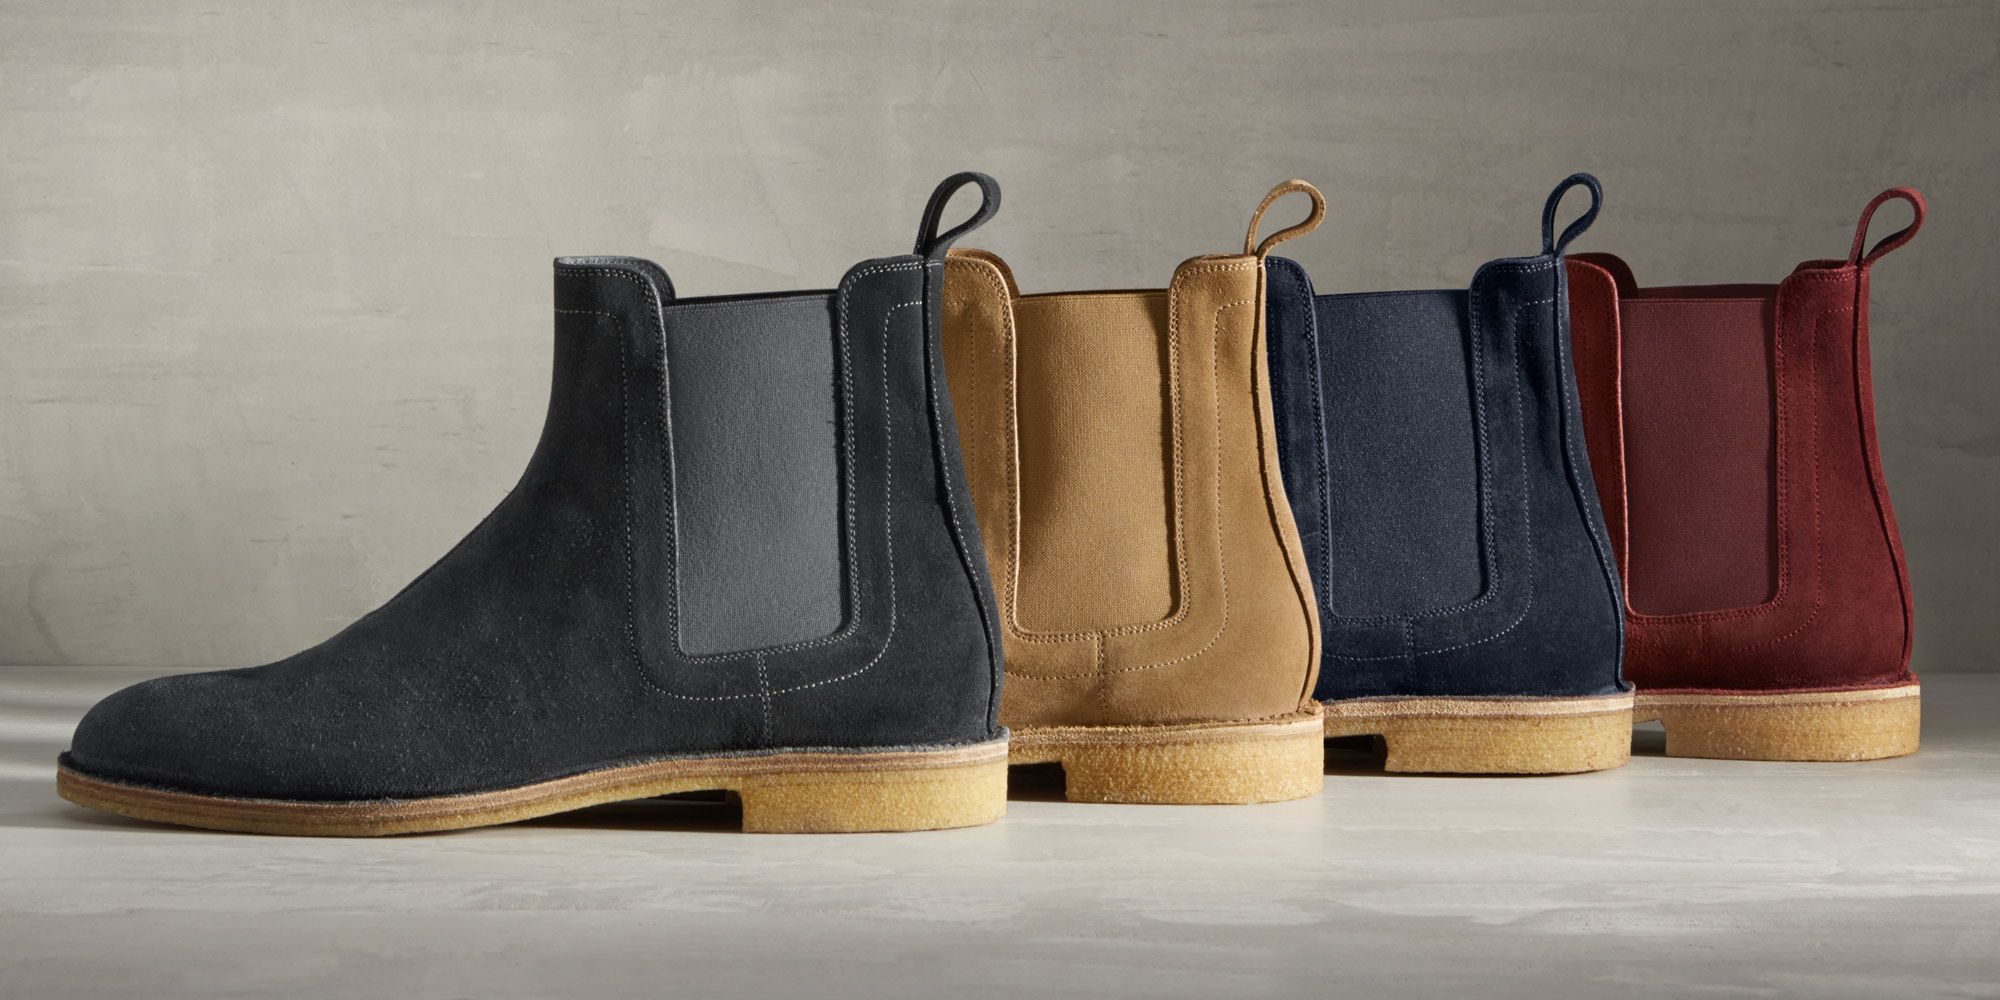 kanye west chelsea boots brand